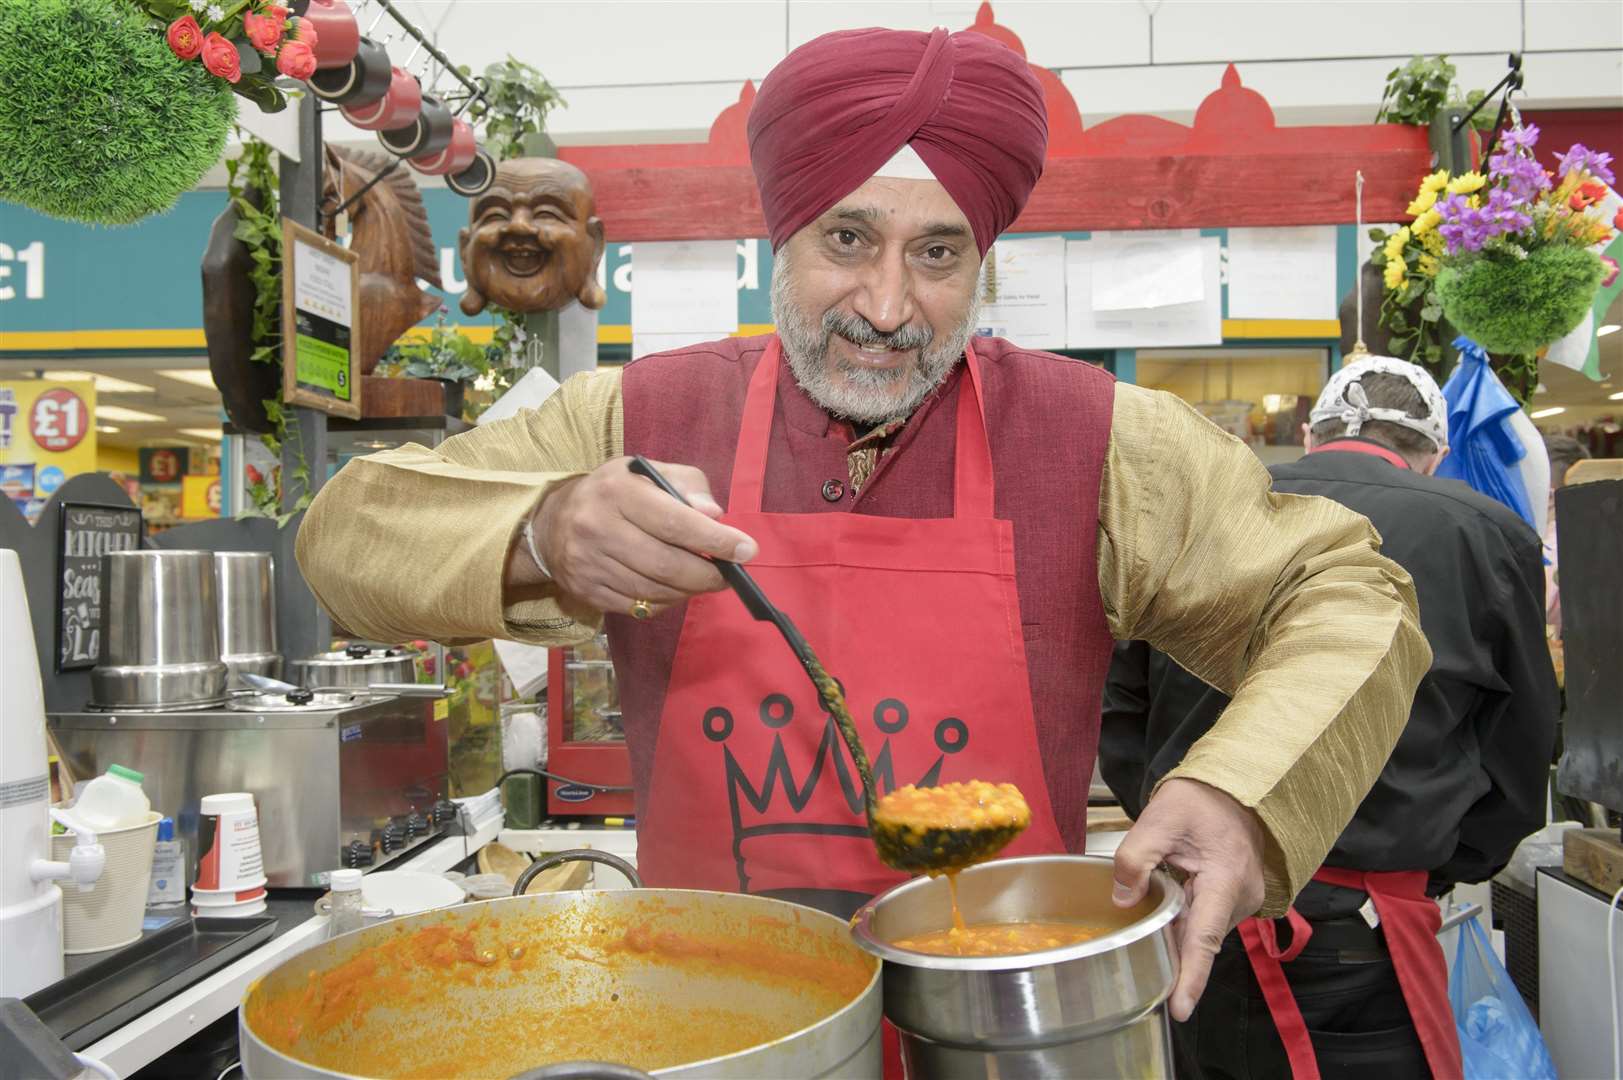 Andy Singh on his stall. Indian street food seller and character Andy Singh holds a fundraiser for charity Making Miracles, at his stall in the Thamesgate Shopping Centre, Gravesend. Picture: Andy Payton (1415288)